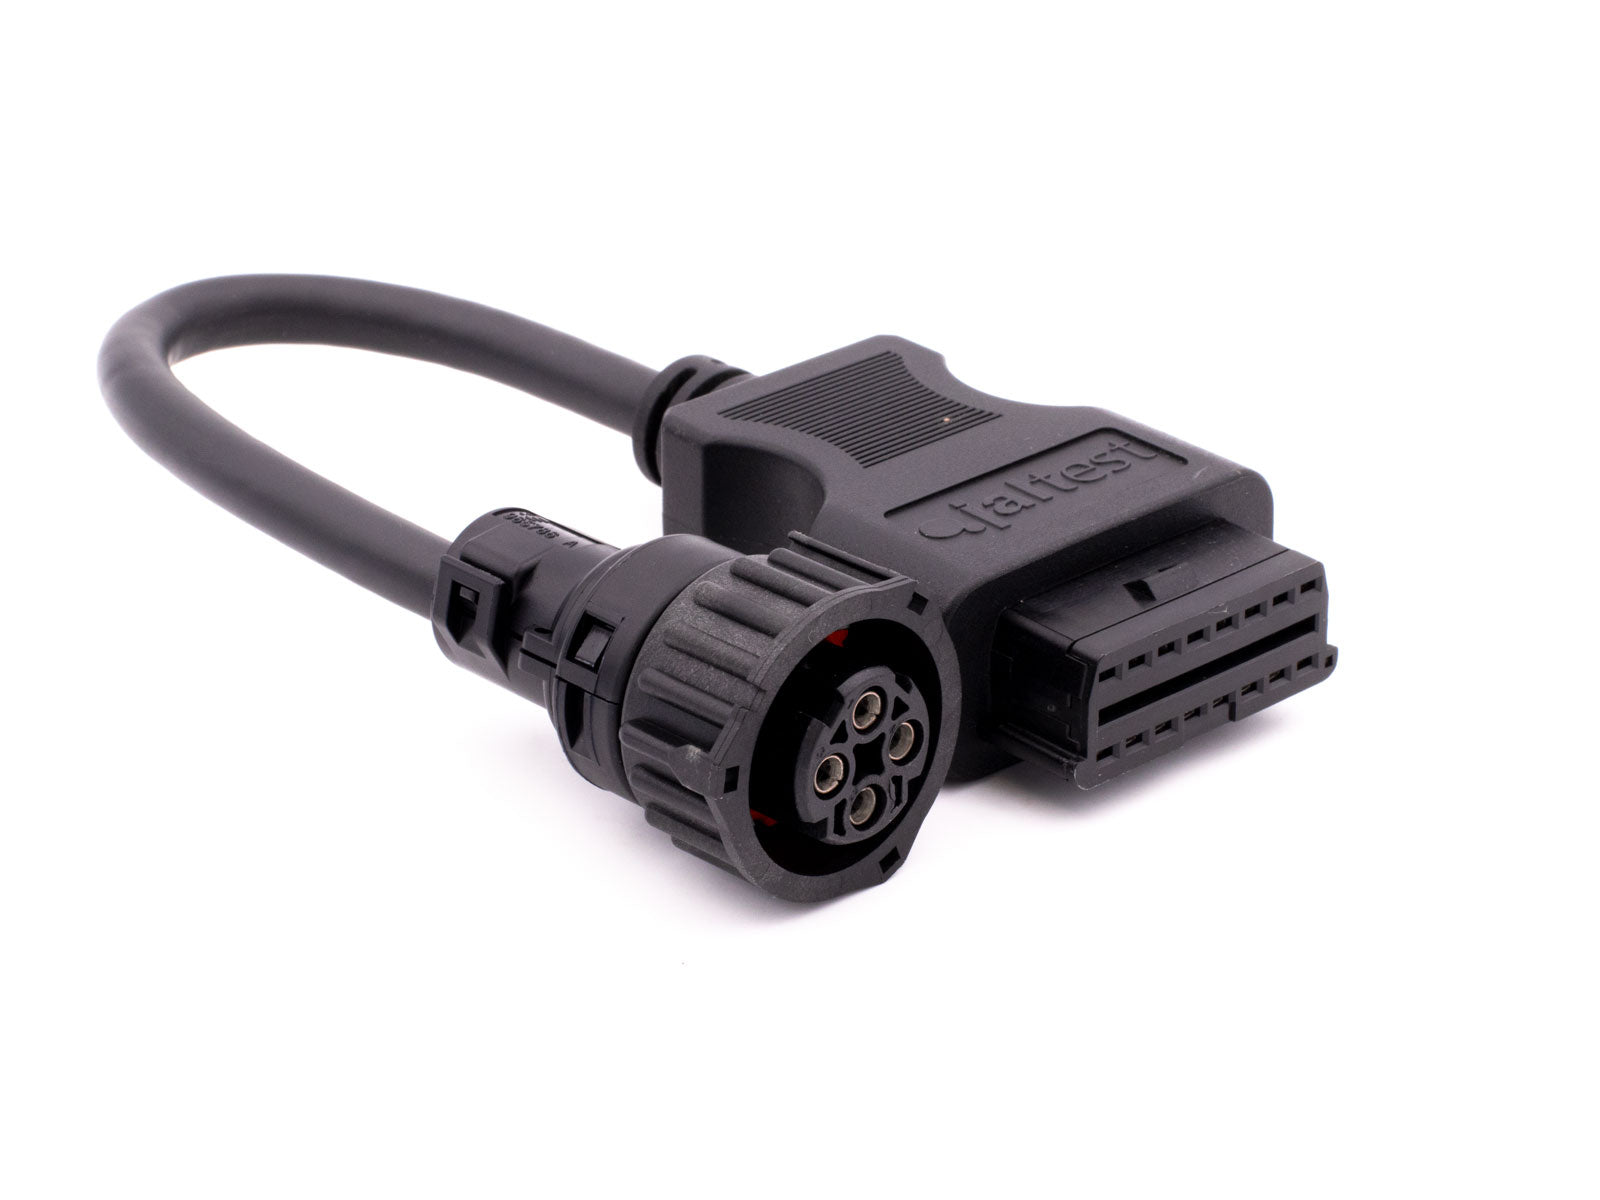 Cojali CAN Scania Engine 4 Pin Cable for Jaltest